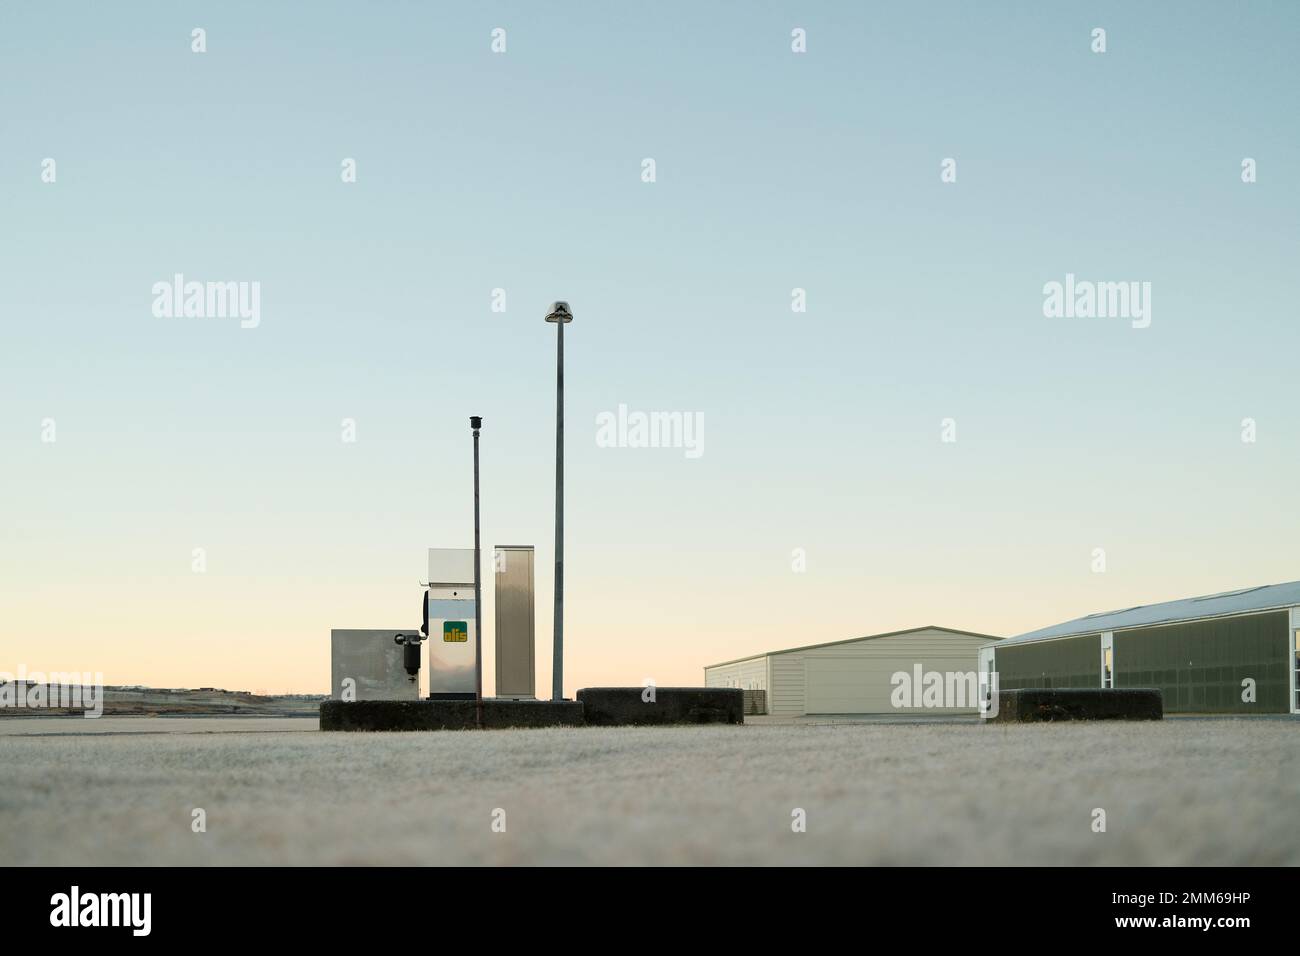 Airport filling station against cloudless sky Stock Photo